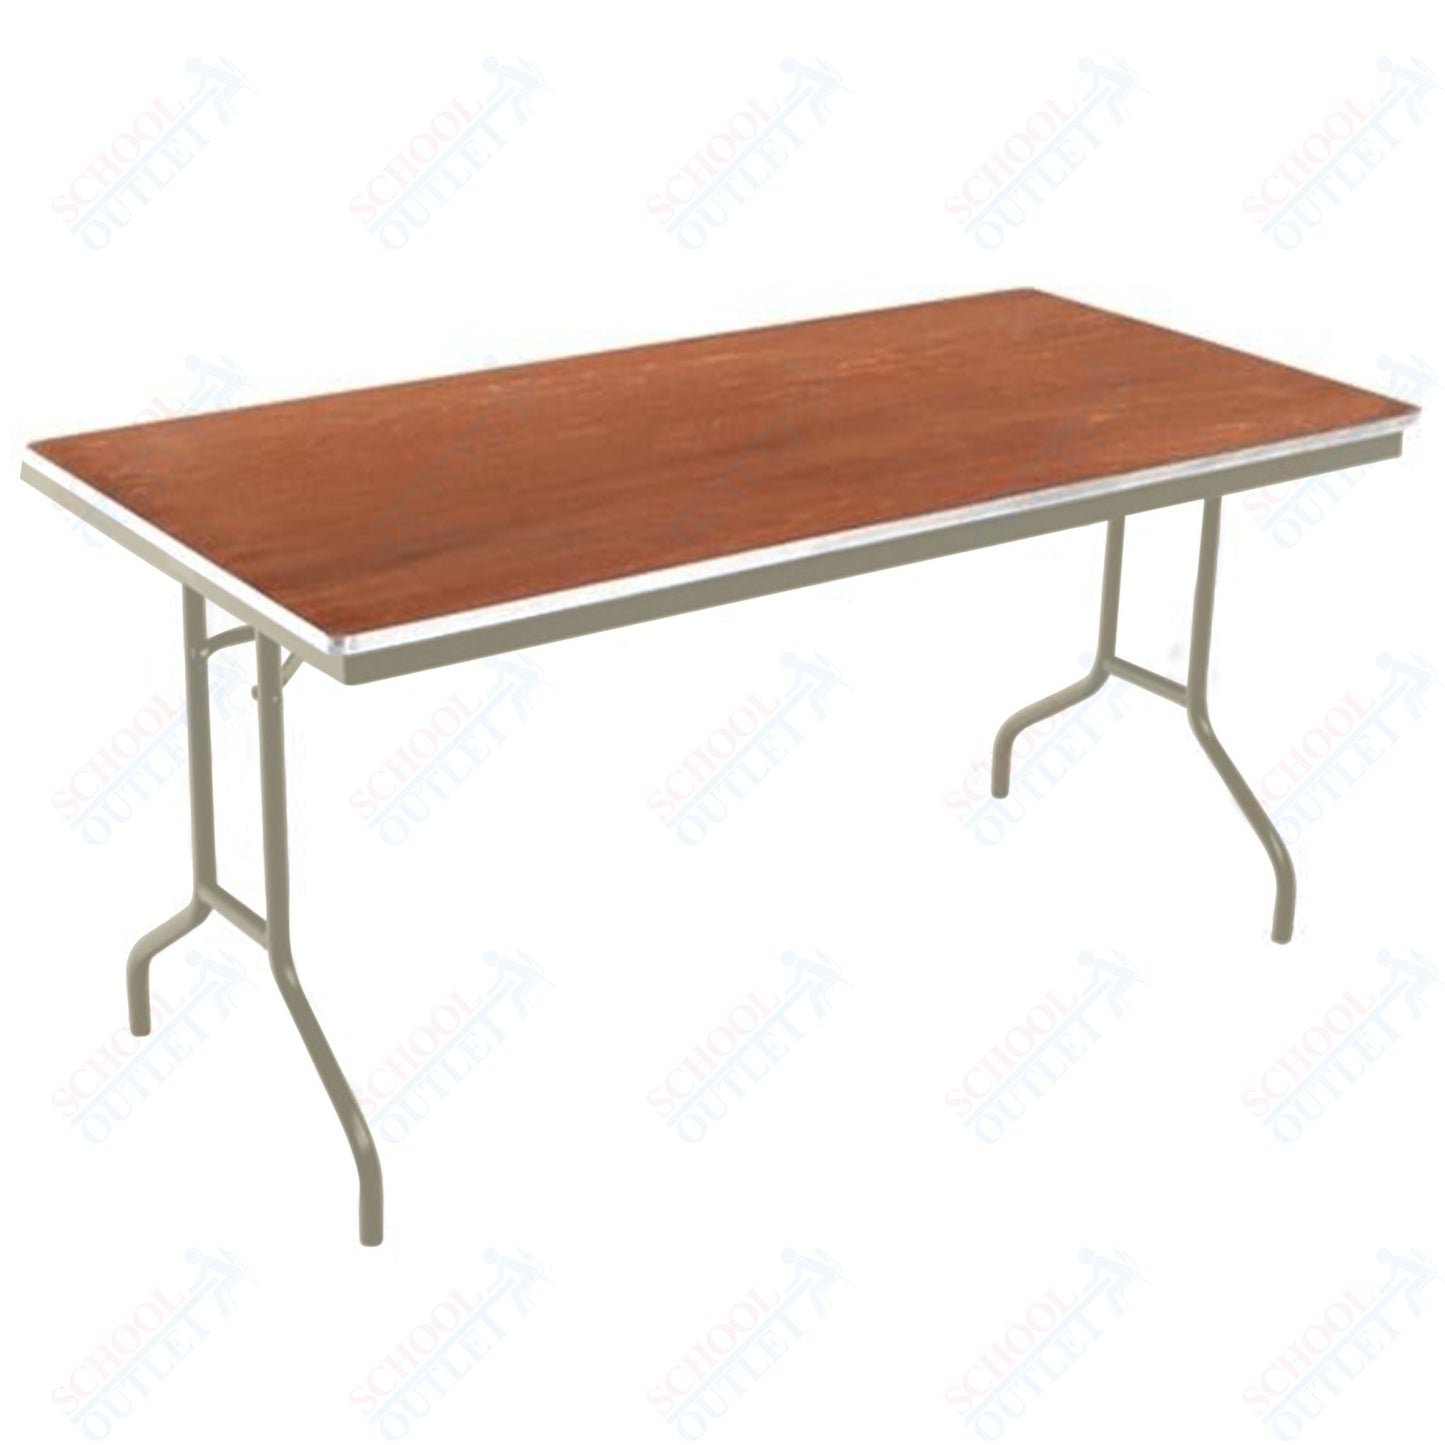 AmTab Folding Table - Plywood Stained and Sealed - Aluminum Edge - 18"W x 96"L x 29"H (AmTab AMT - 188PA) - SchoolOutlet